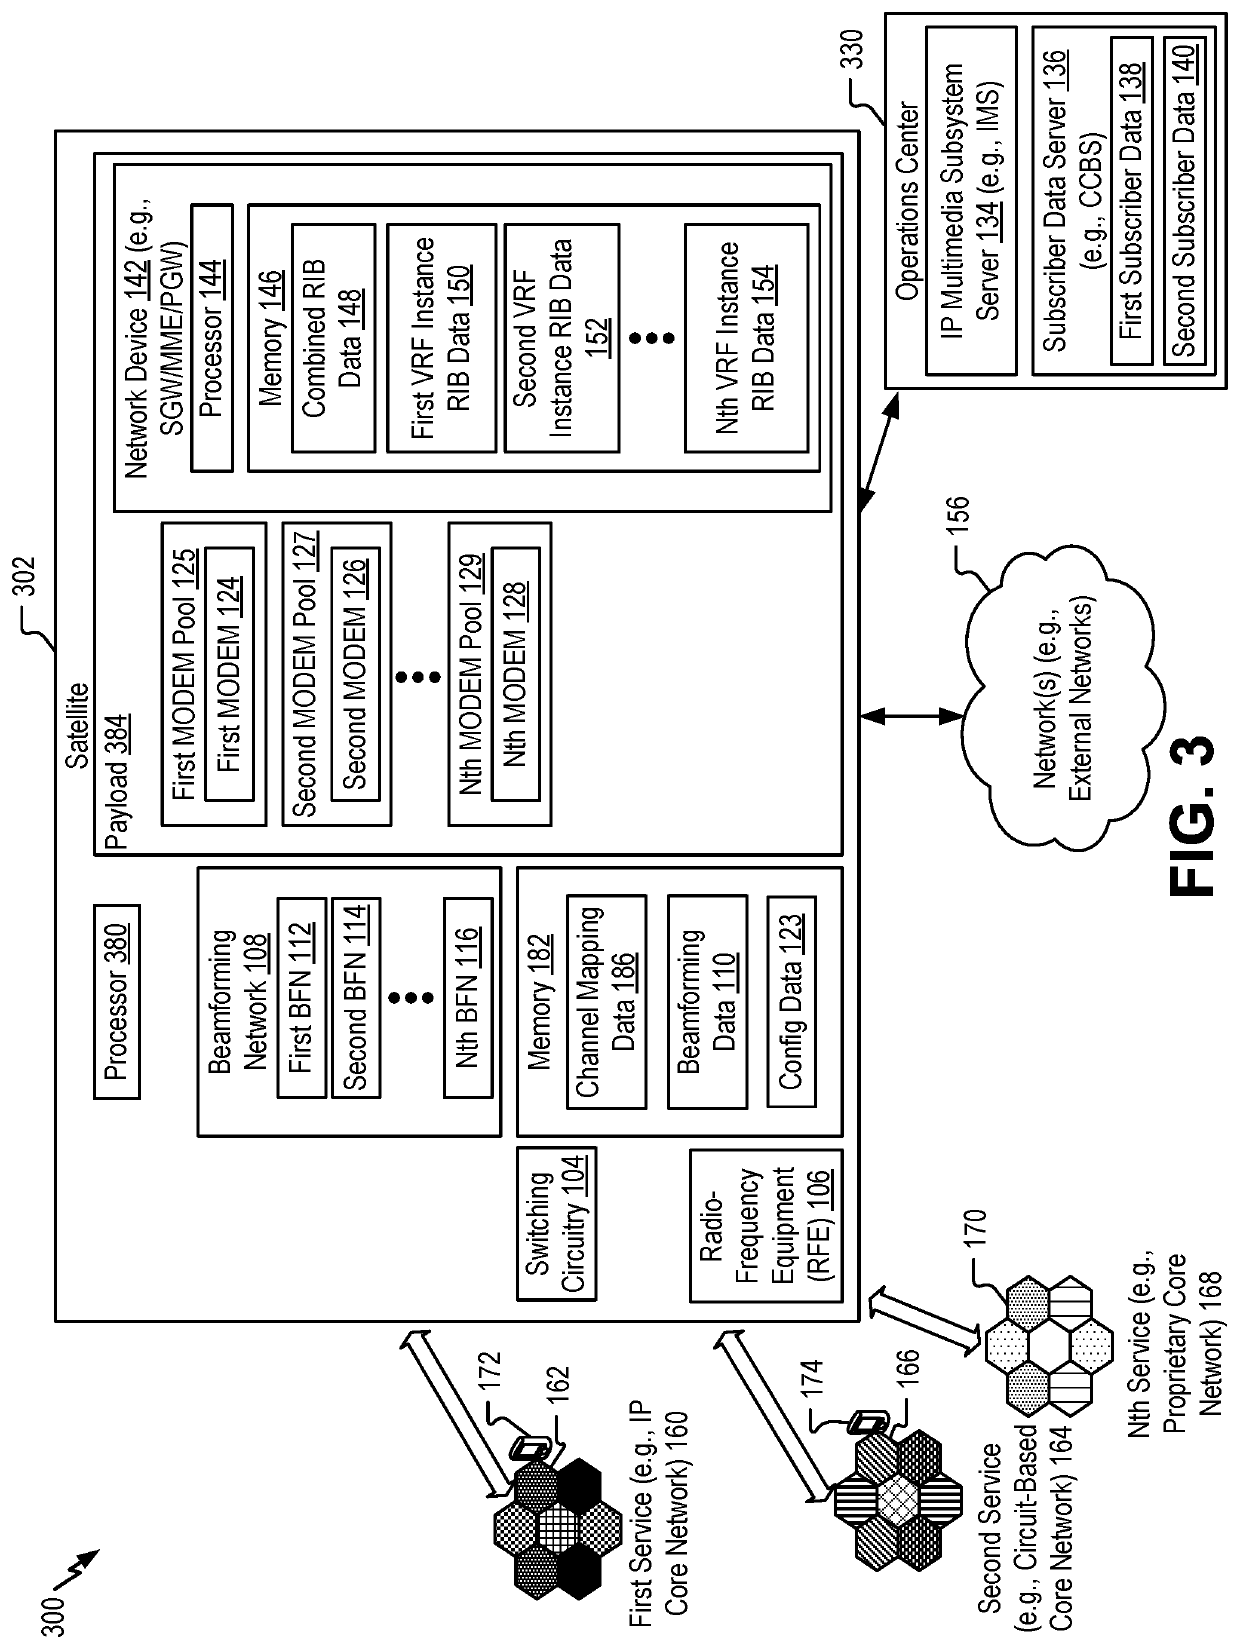 System and method for network traffic processing based on federated services and user groups